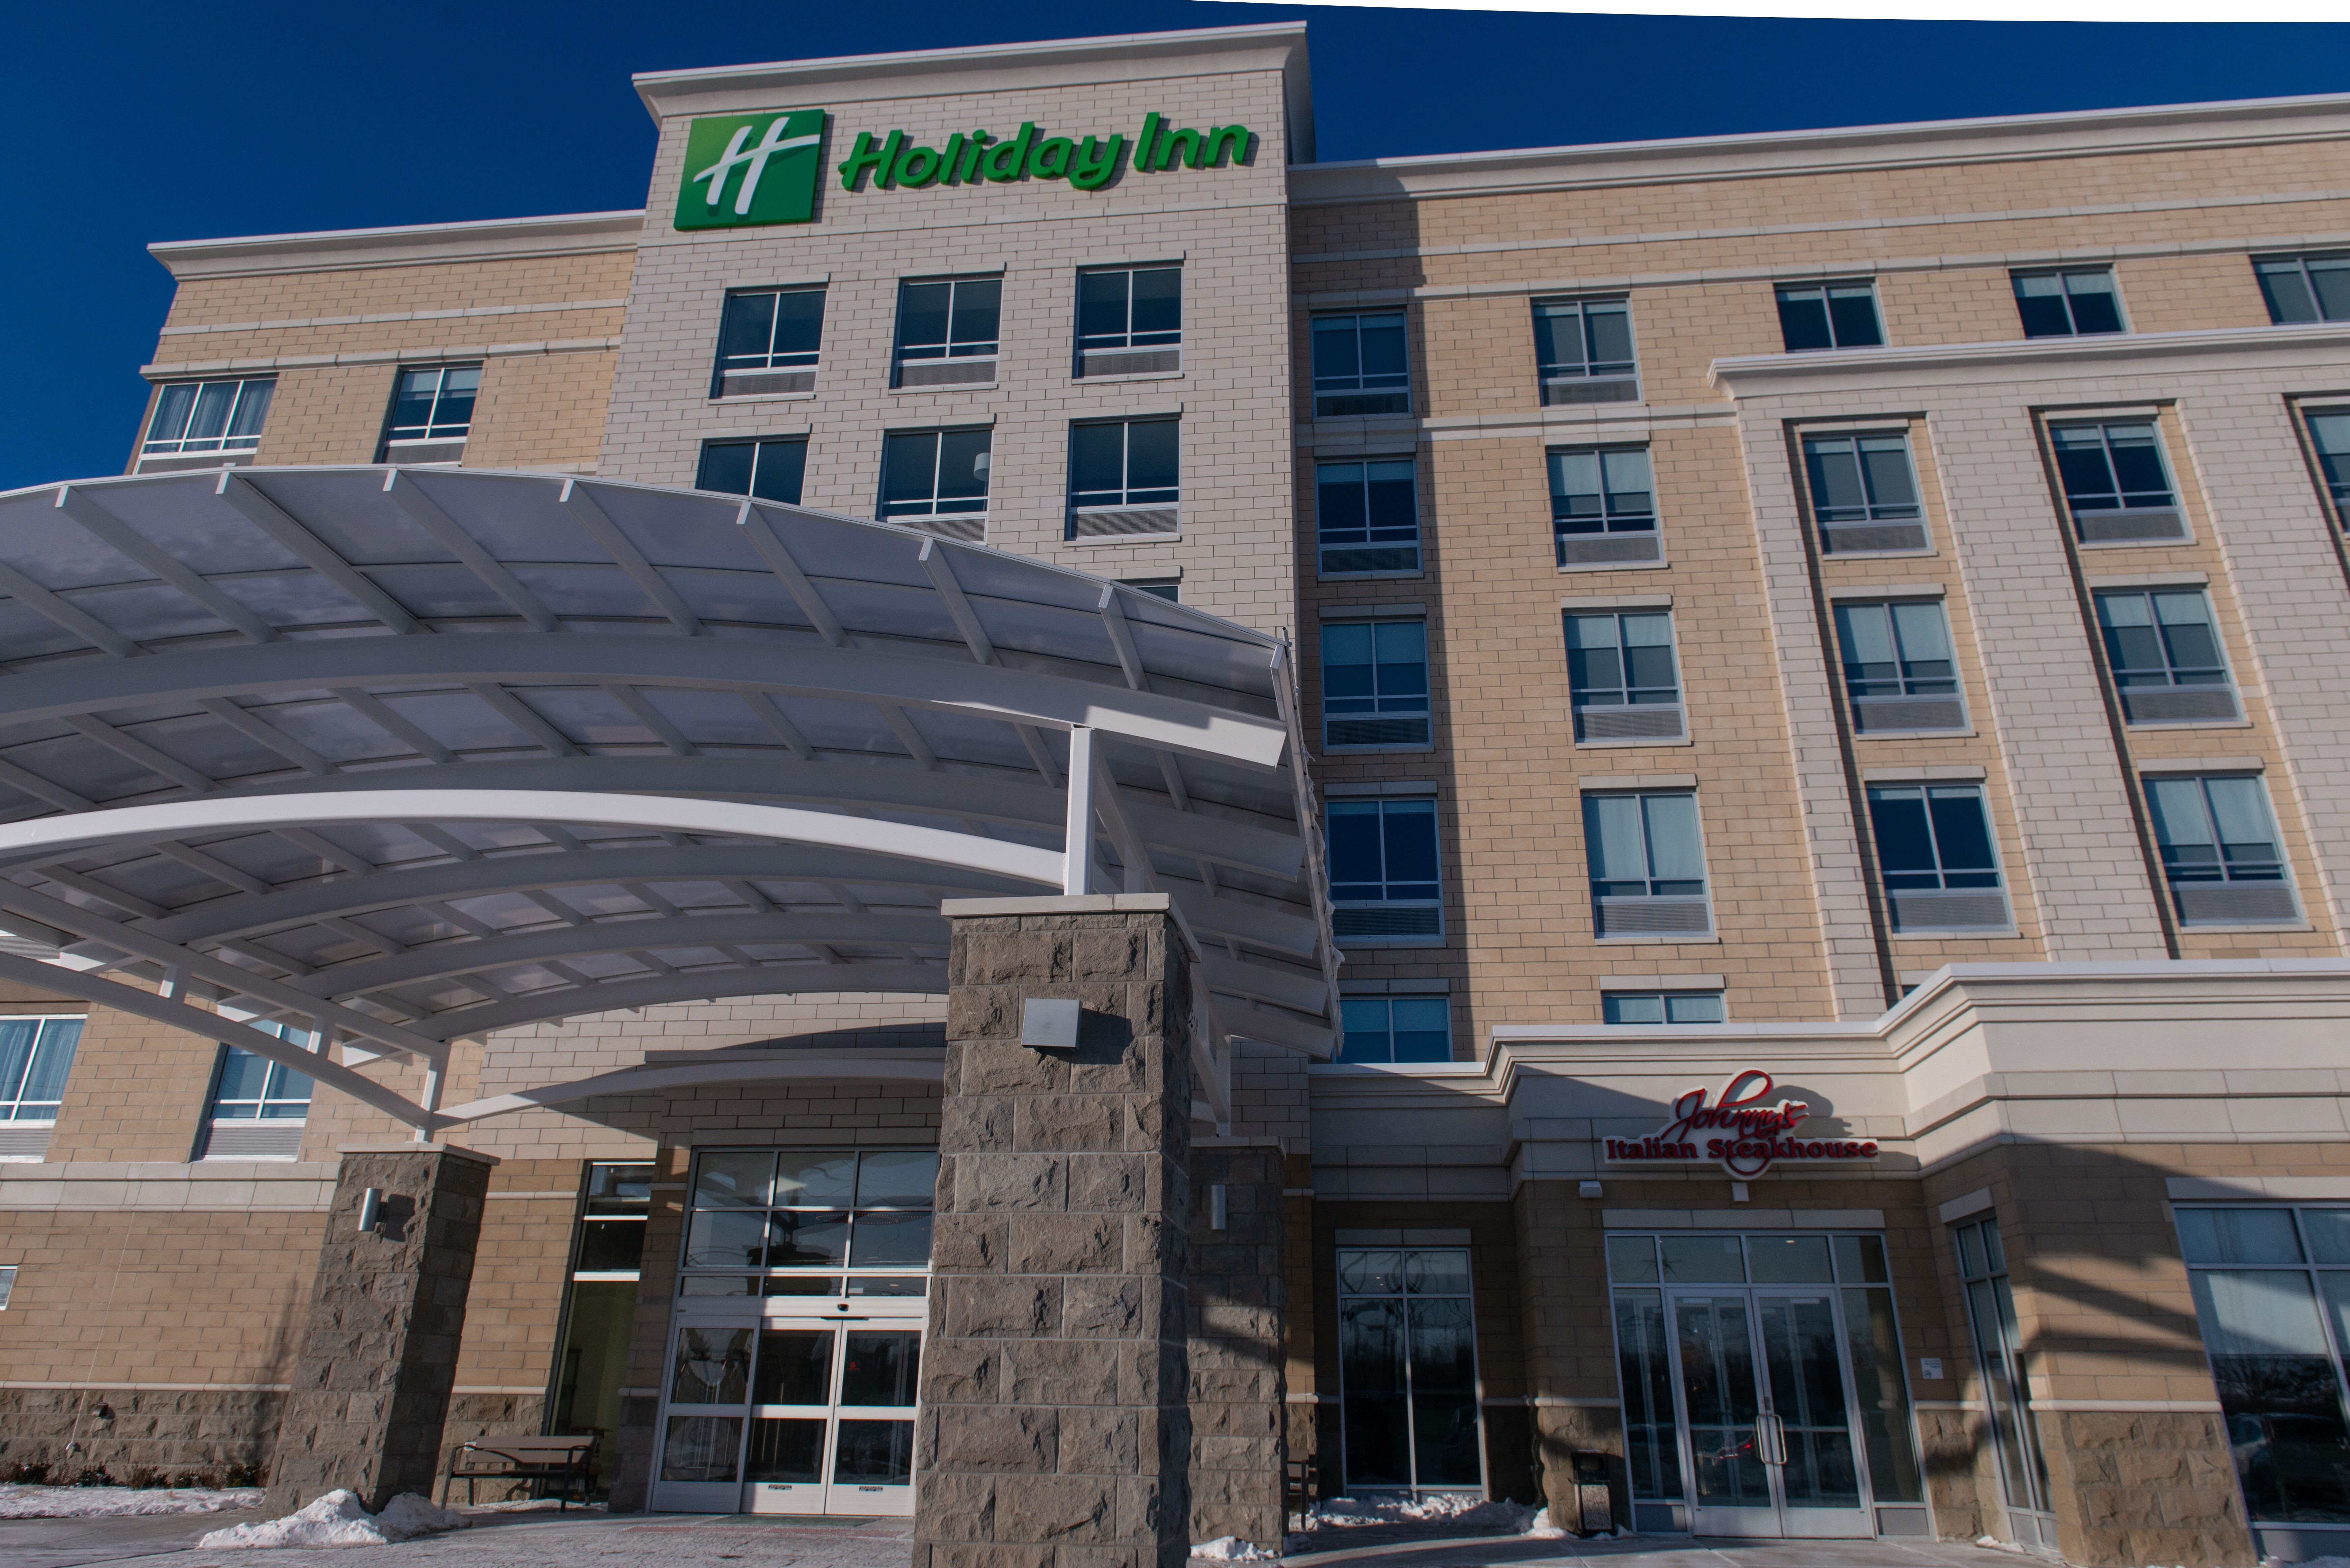 Welcome to Holiday Inn, a modern hotel in Livonia MI.